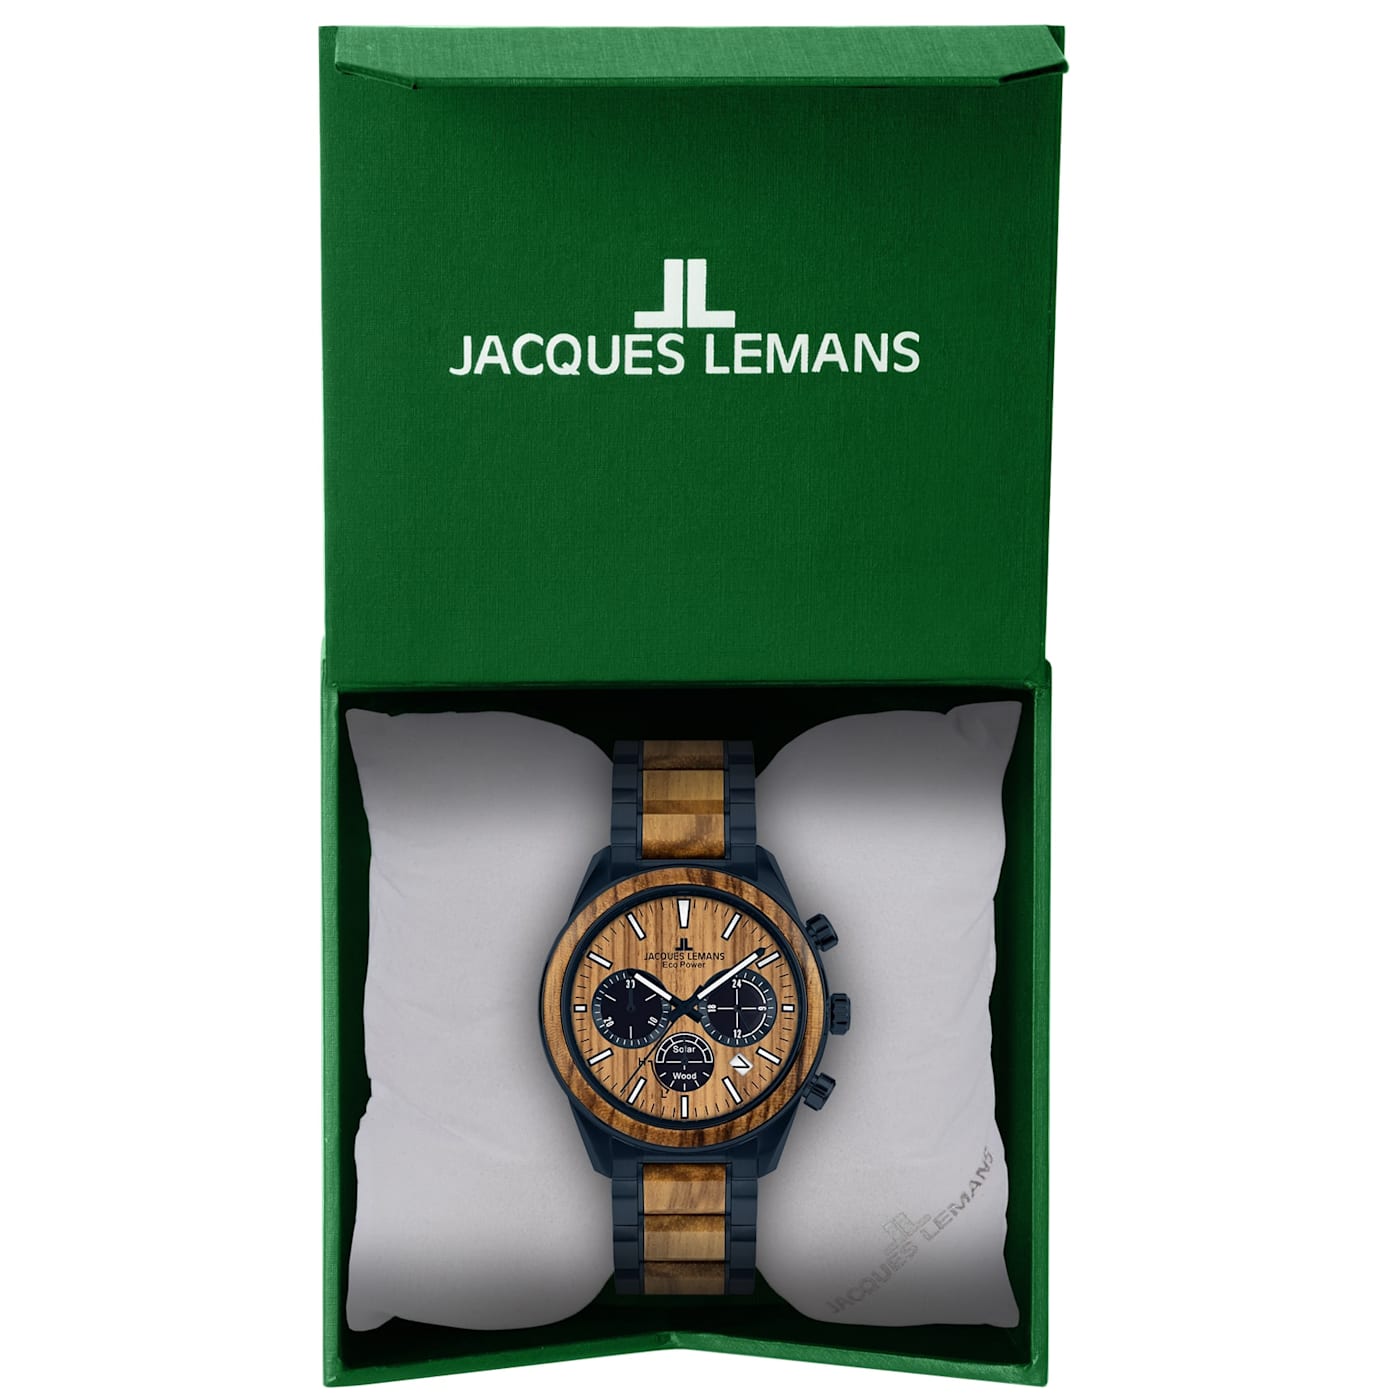 JACQUES LEMANS Eco Power Men's Watch w/Stainless Steel/Wood Inlay Strap  Blue, Chronograph 1-2115 - 12KT3A